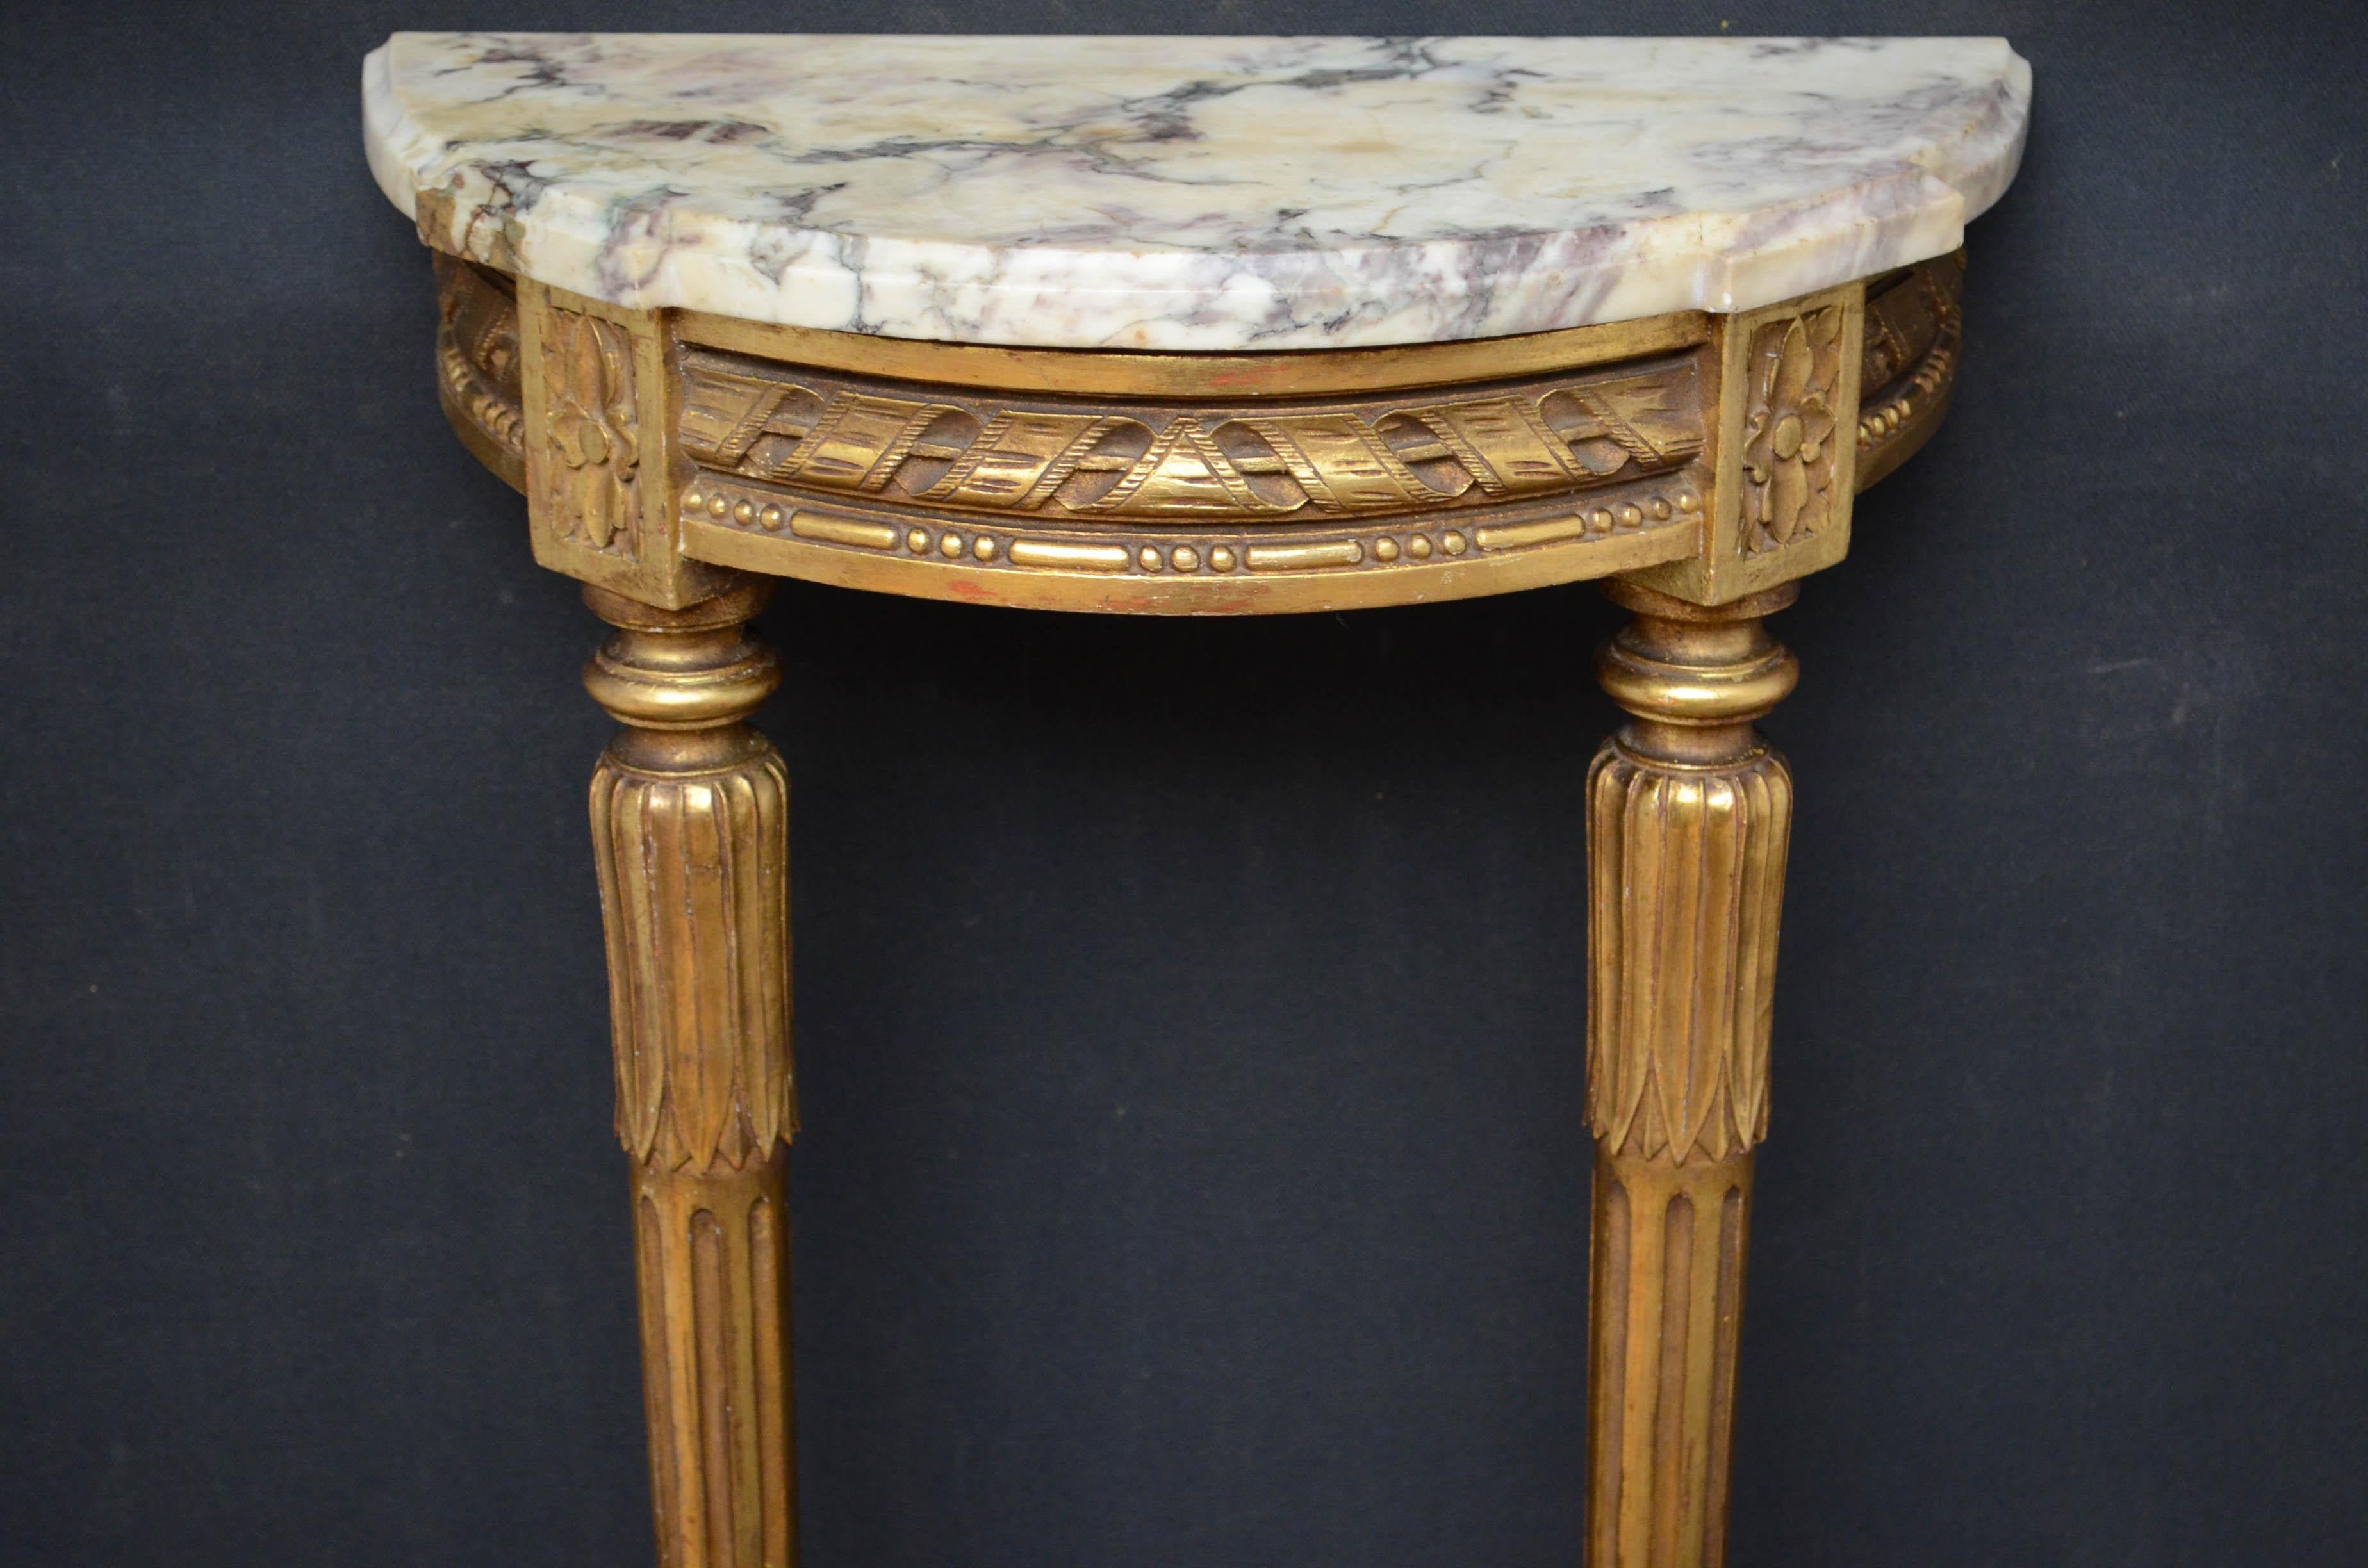 French Louis XVI Revival Giltwood Console Table